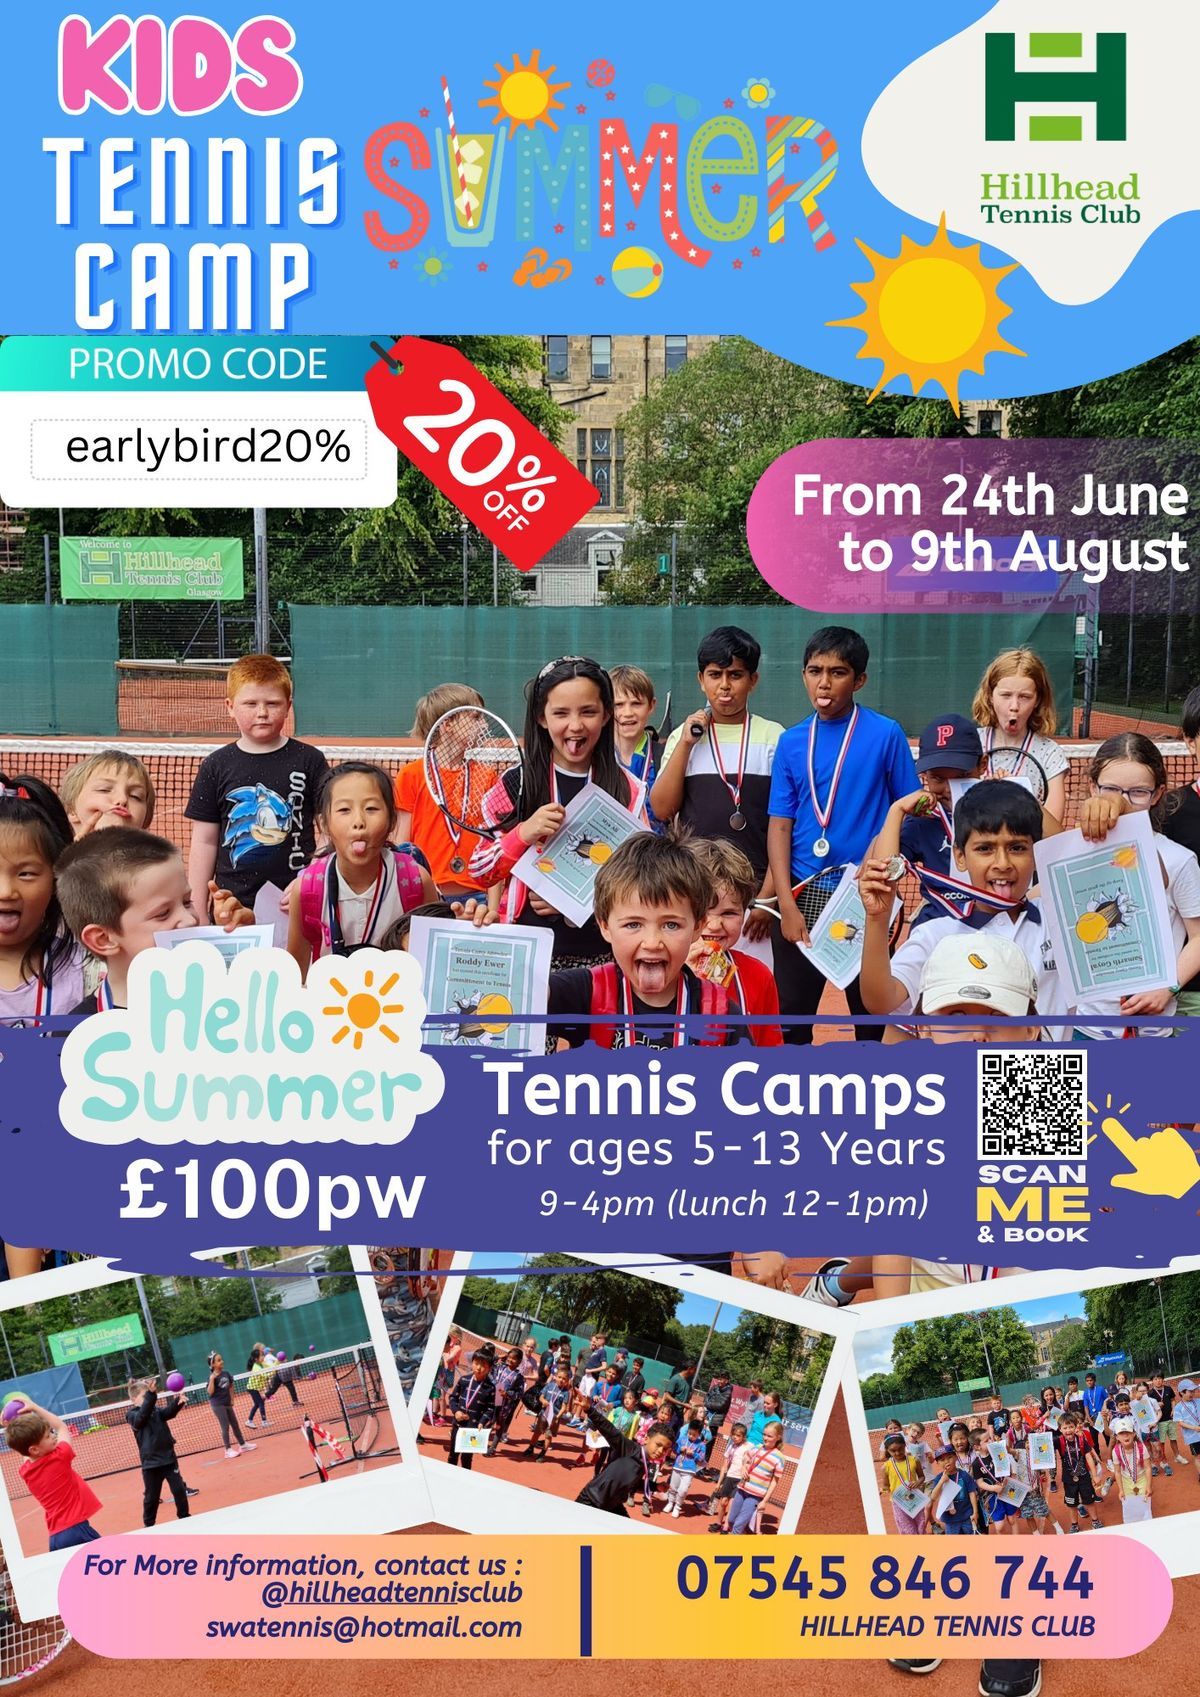 Summer Tennis Camps Wk 1 - Ages 5-13 Years